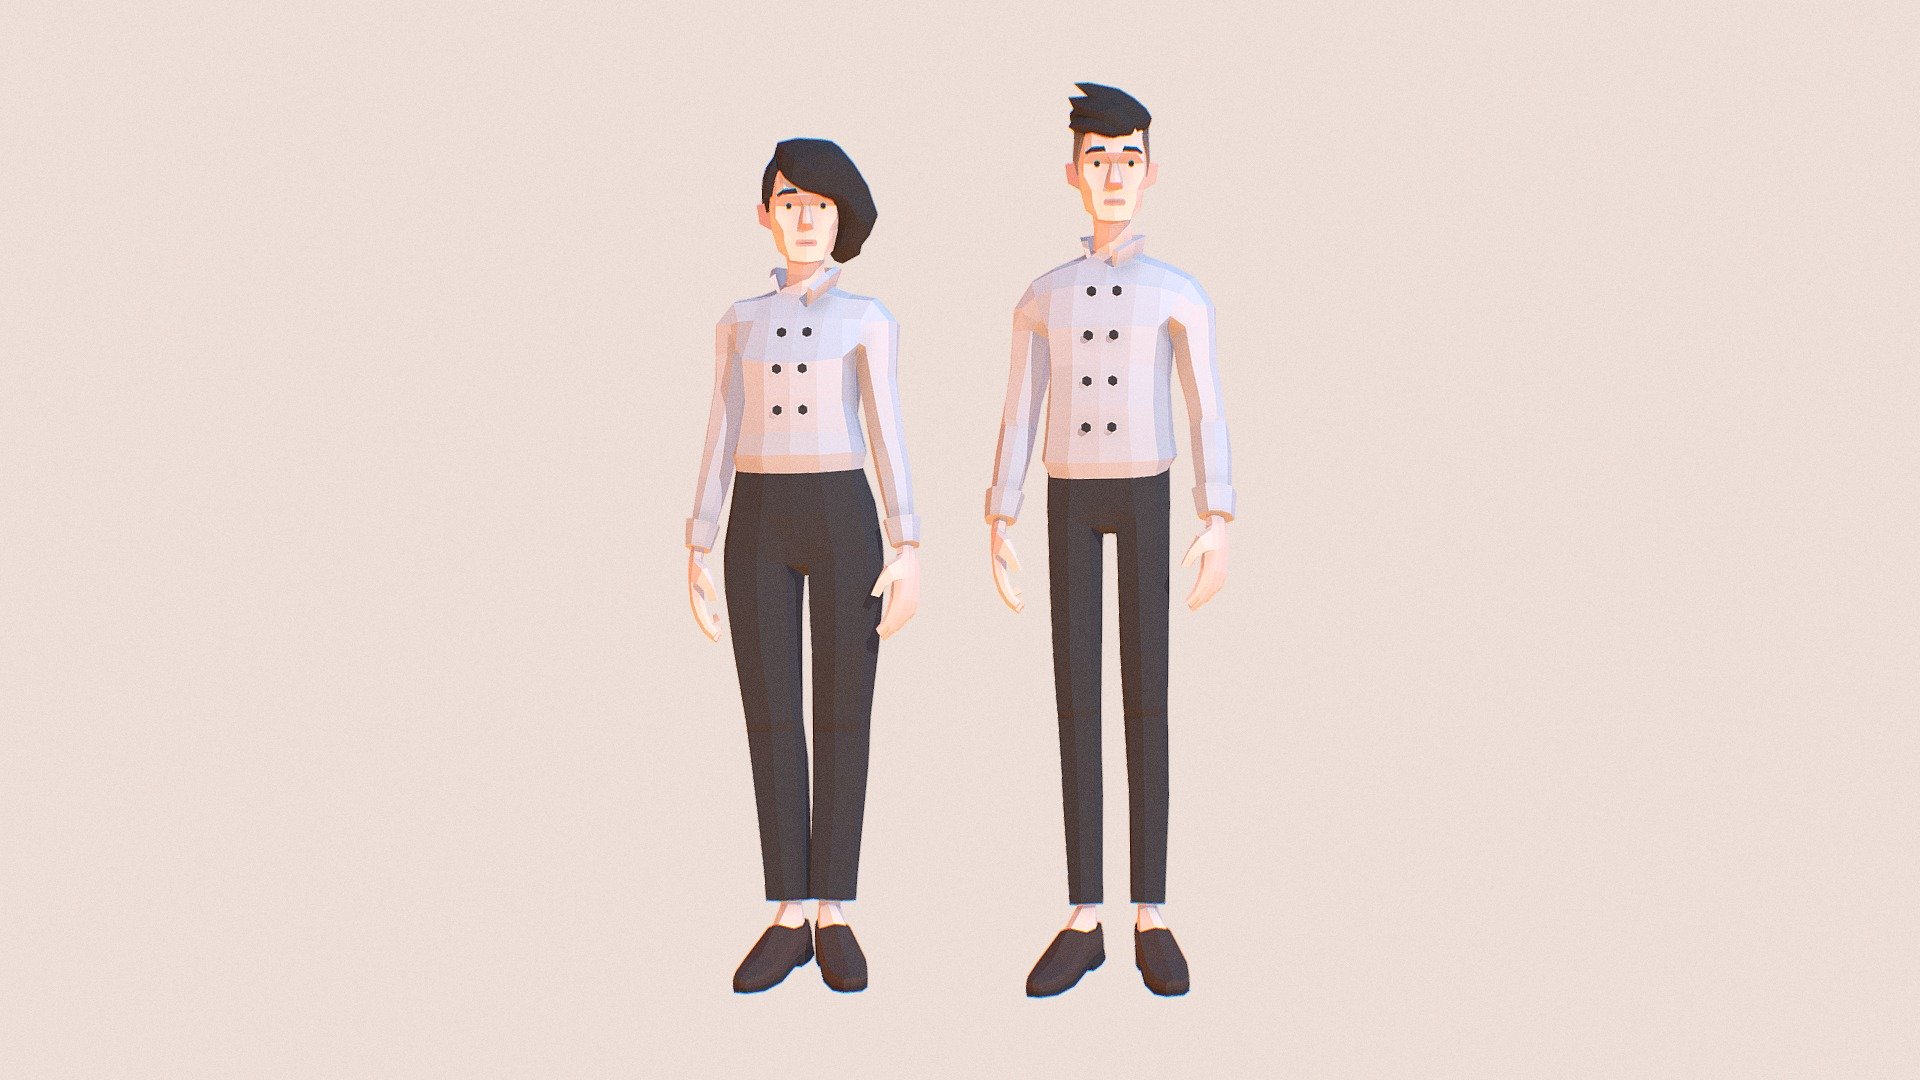 ONLY FOR UNITY

Please download the attached file. The zip file contains the unity package for Unity 2018
The pack contains two different outfits, a casual outfit and the main outfit, I call them suits. I have included 5+ different hairstyles, 10 facial hair, and 3 different hand options to further customise the characters. The face can be customized and also contains expressions if you wish to create emotions or speech animations.

Mixamo
Characters can be animated using mixamo, I have included a simple tutorial for it in the readmeee.

Note: The suits cannot be customized as they are not separated.

NOTE: Game engine supported files are included in additional downloads, the preview models are just for preview and do not come with a rig.

 - Chefs | Lowpoly Characters - Buy Royalty Free 3D model by Aki (@Akishaqs) 3d model